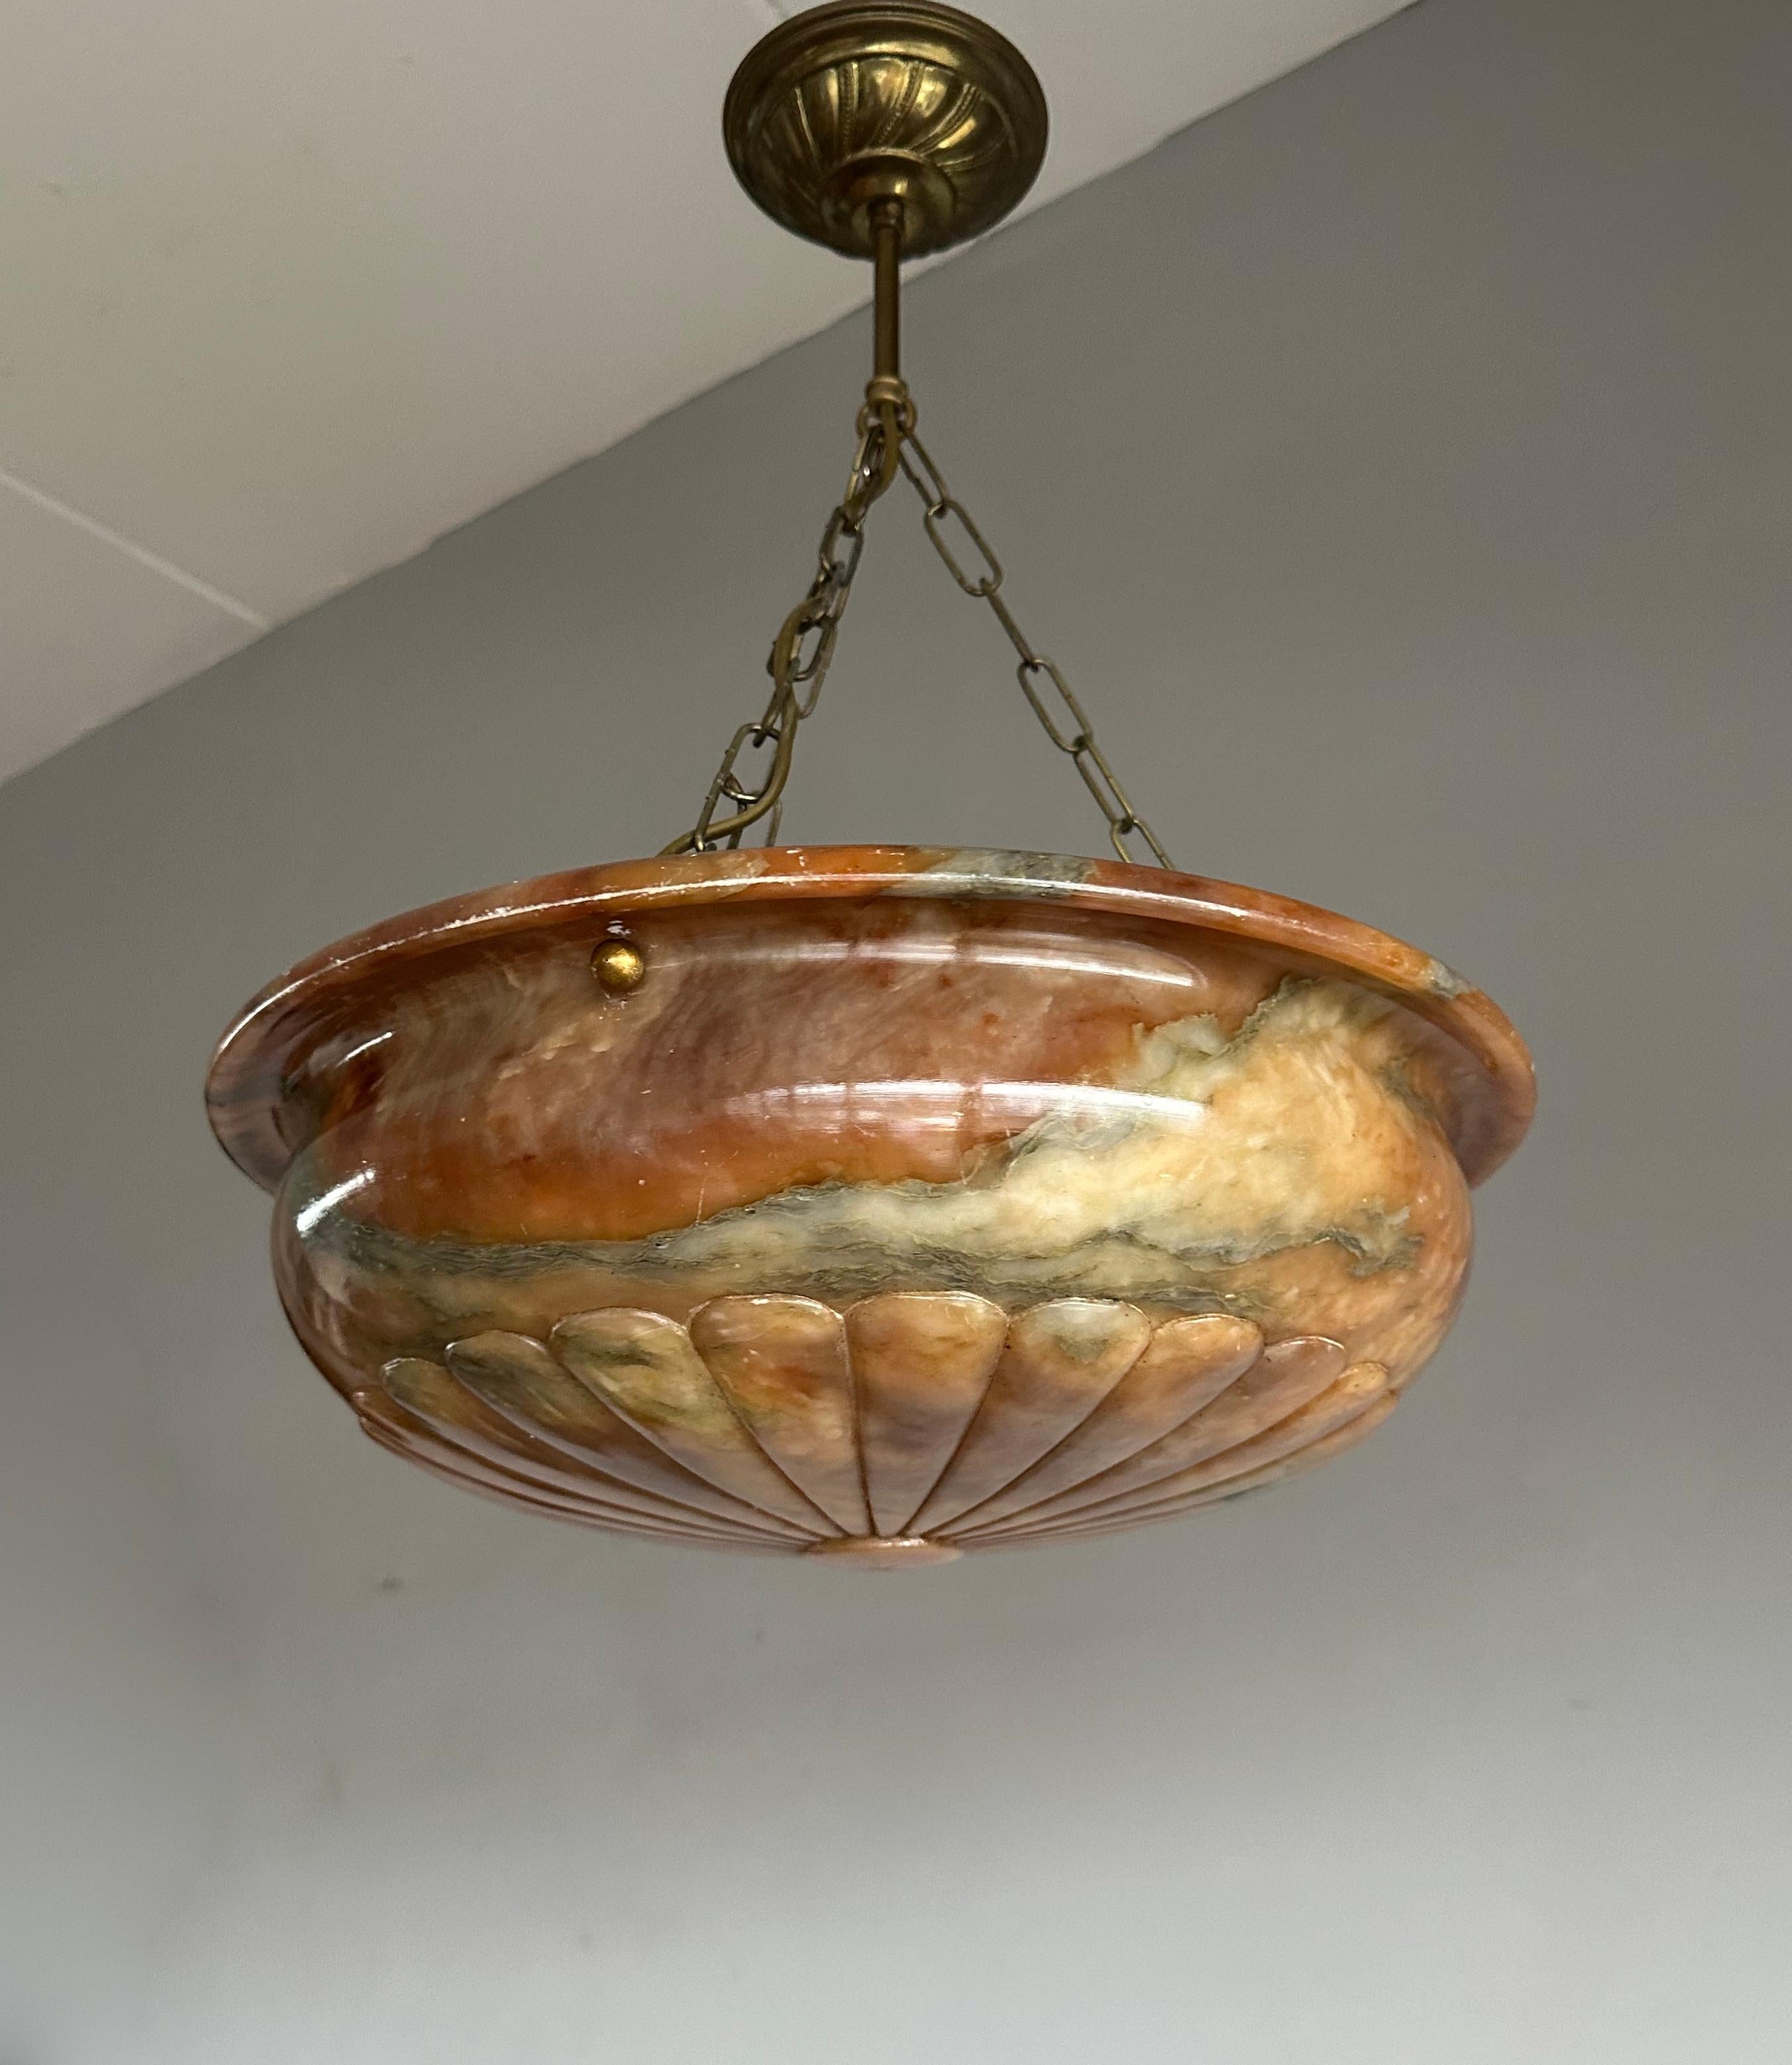 Perfectly Design Antique Alabaster Chandelier / Pendant Light in Mint Condition For Sale 7